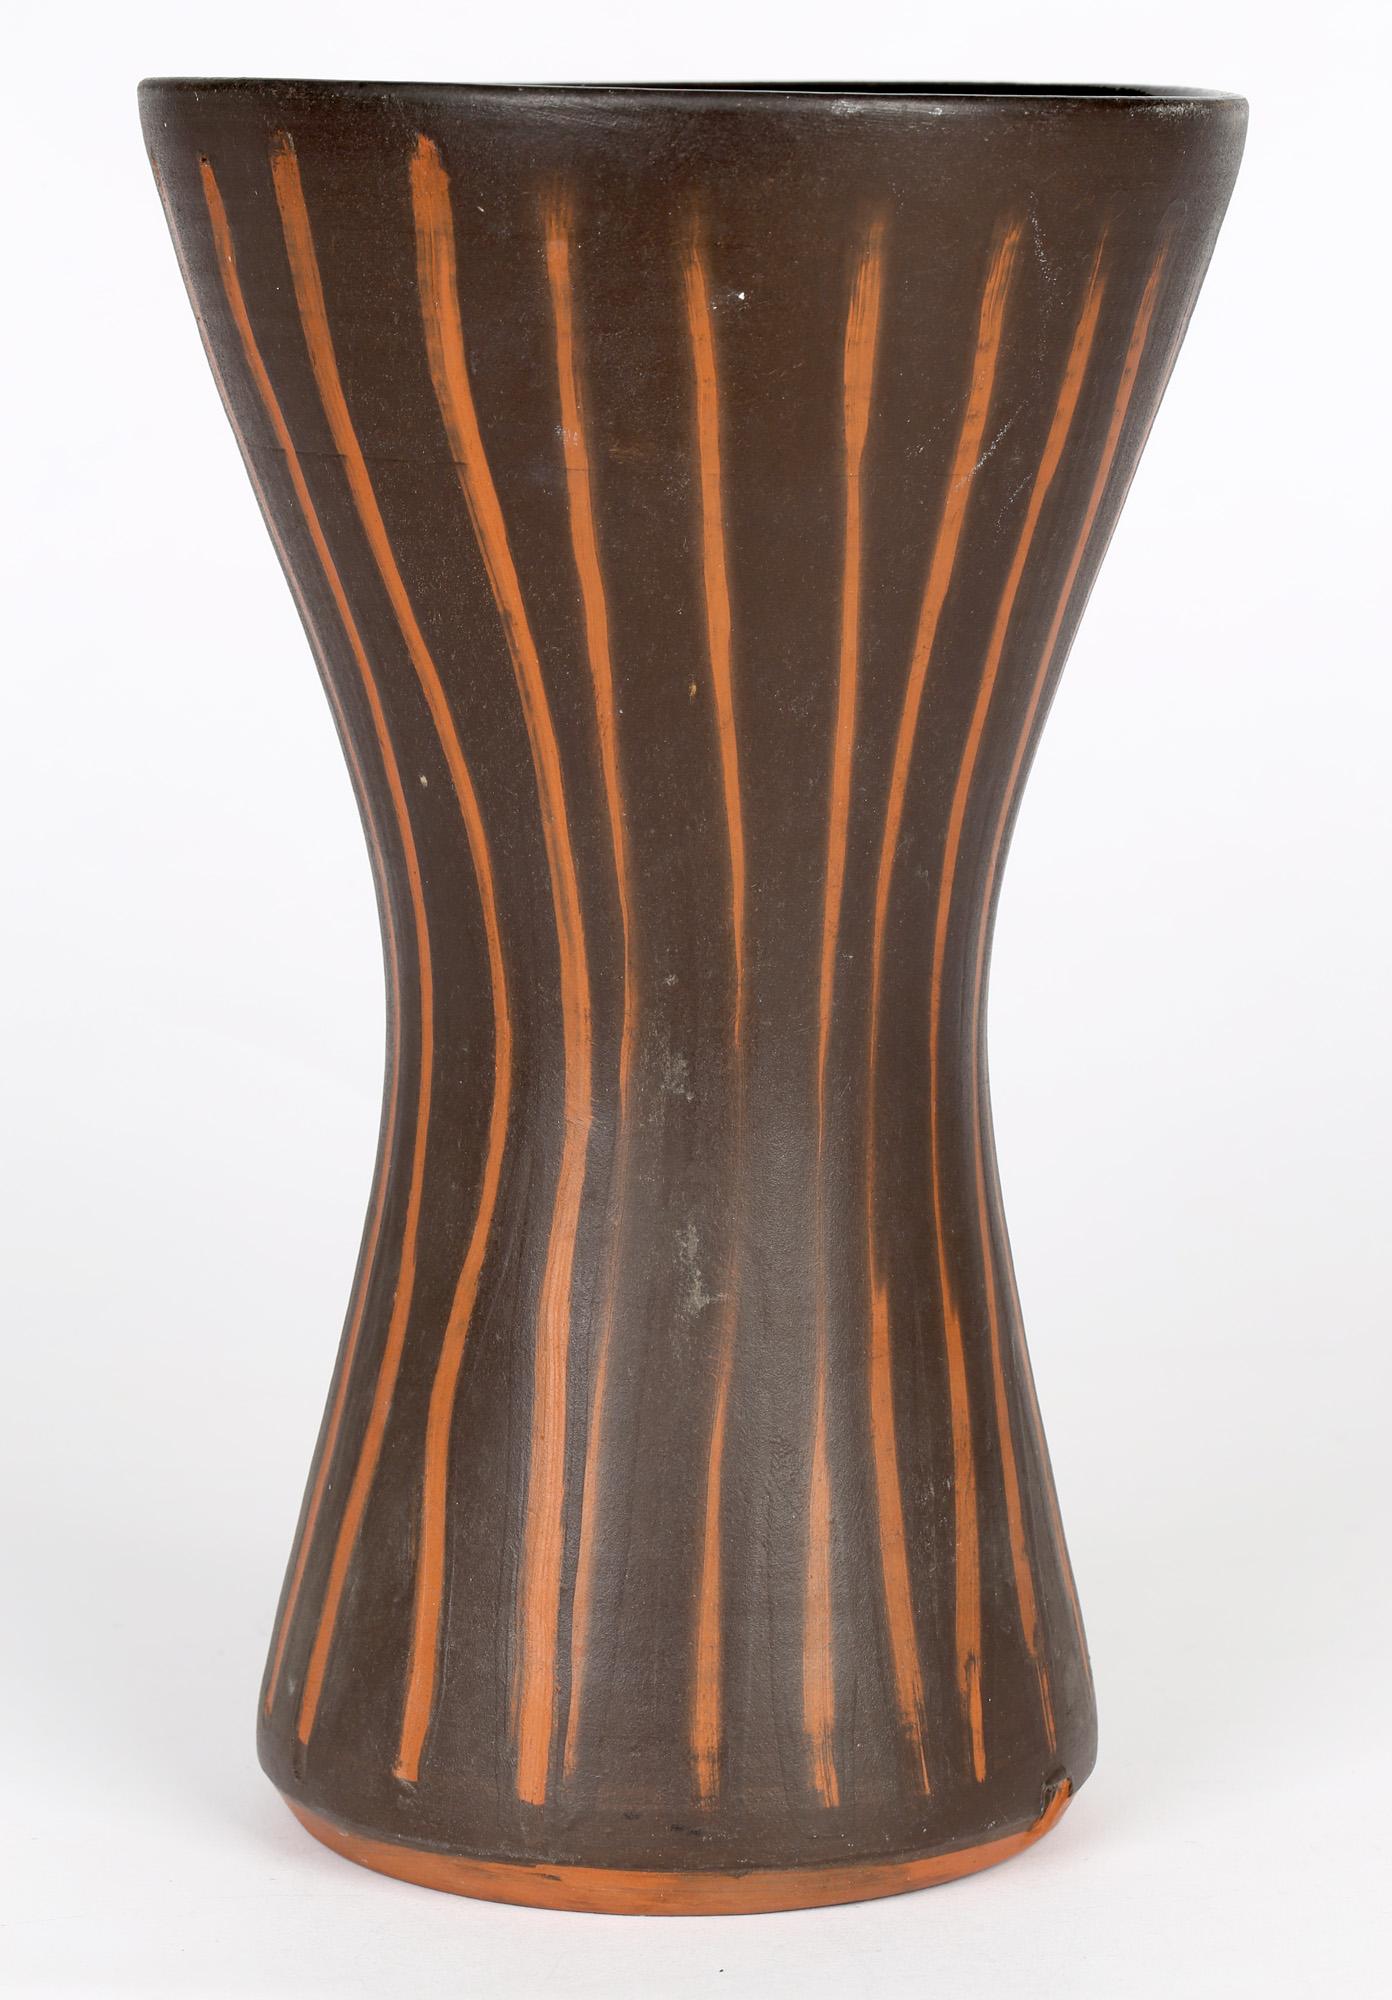 A fine and unusual large studio pottery vase of tapering waisted form with contrasting vertical stripes on dark brown ground by David Leach (1911-2005) and probably made in the early days of Lowerdown around 1960. The vase is made in red clay and